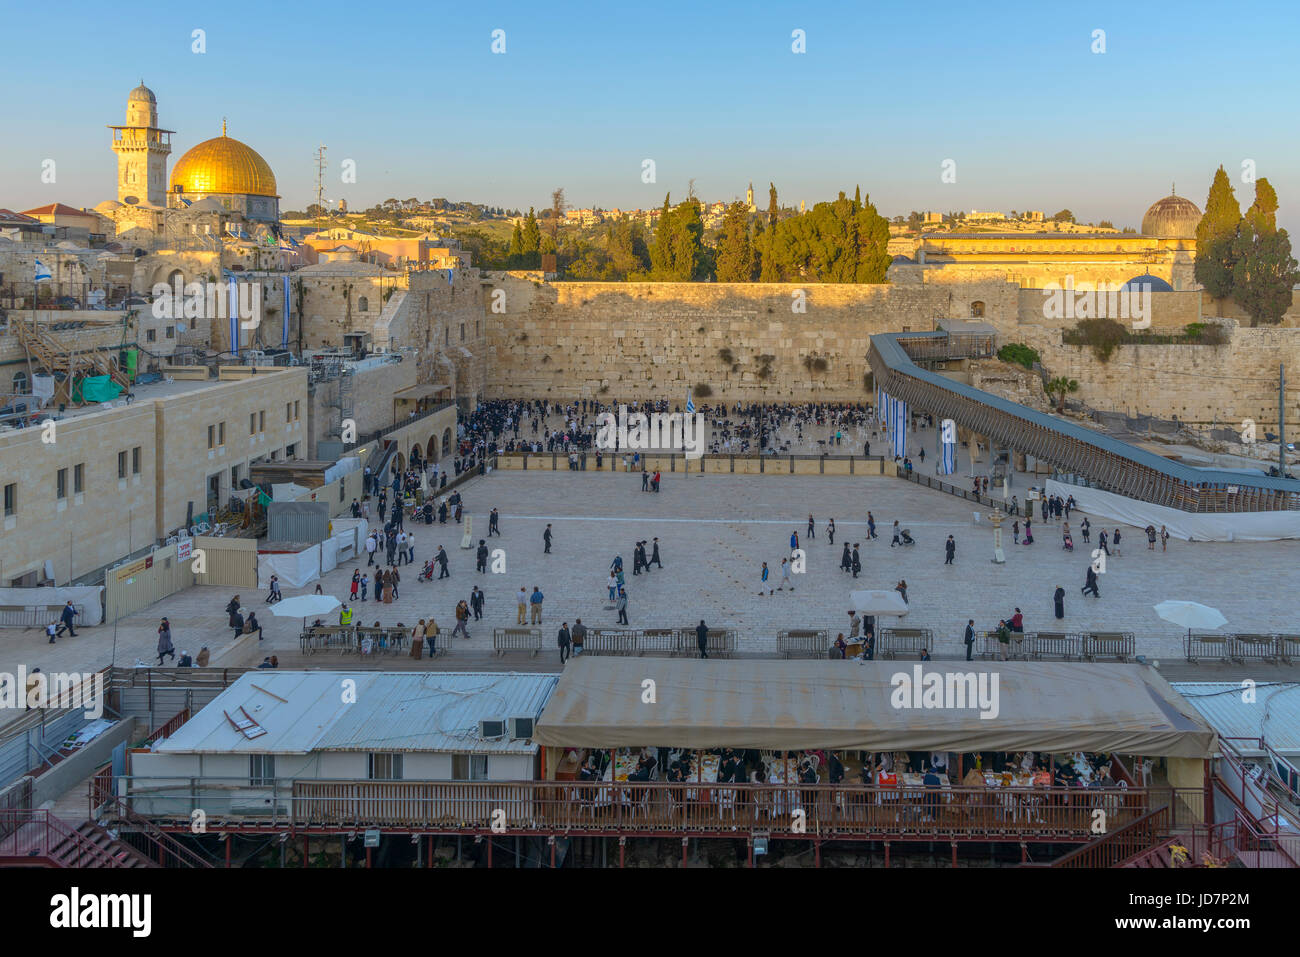 JERUSALEM, ISRAEL - April 18, 2015: The Temple Mount - Western Wall and the golden Dome of the Rock mosque in the old city of Jerusalem, Israel Stock Photo